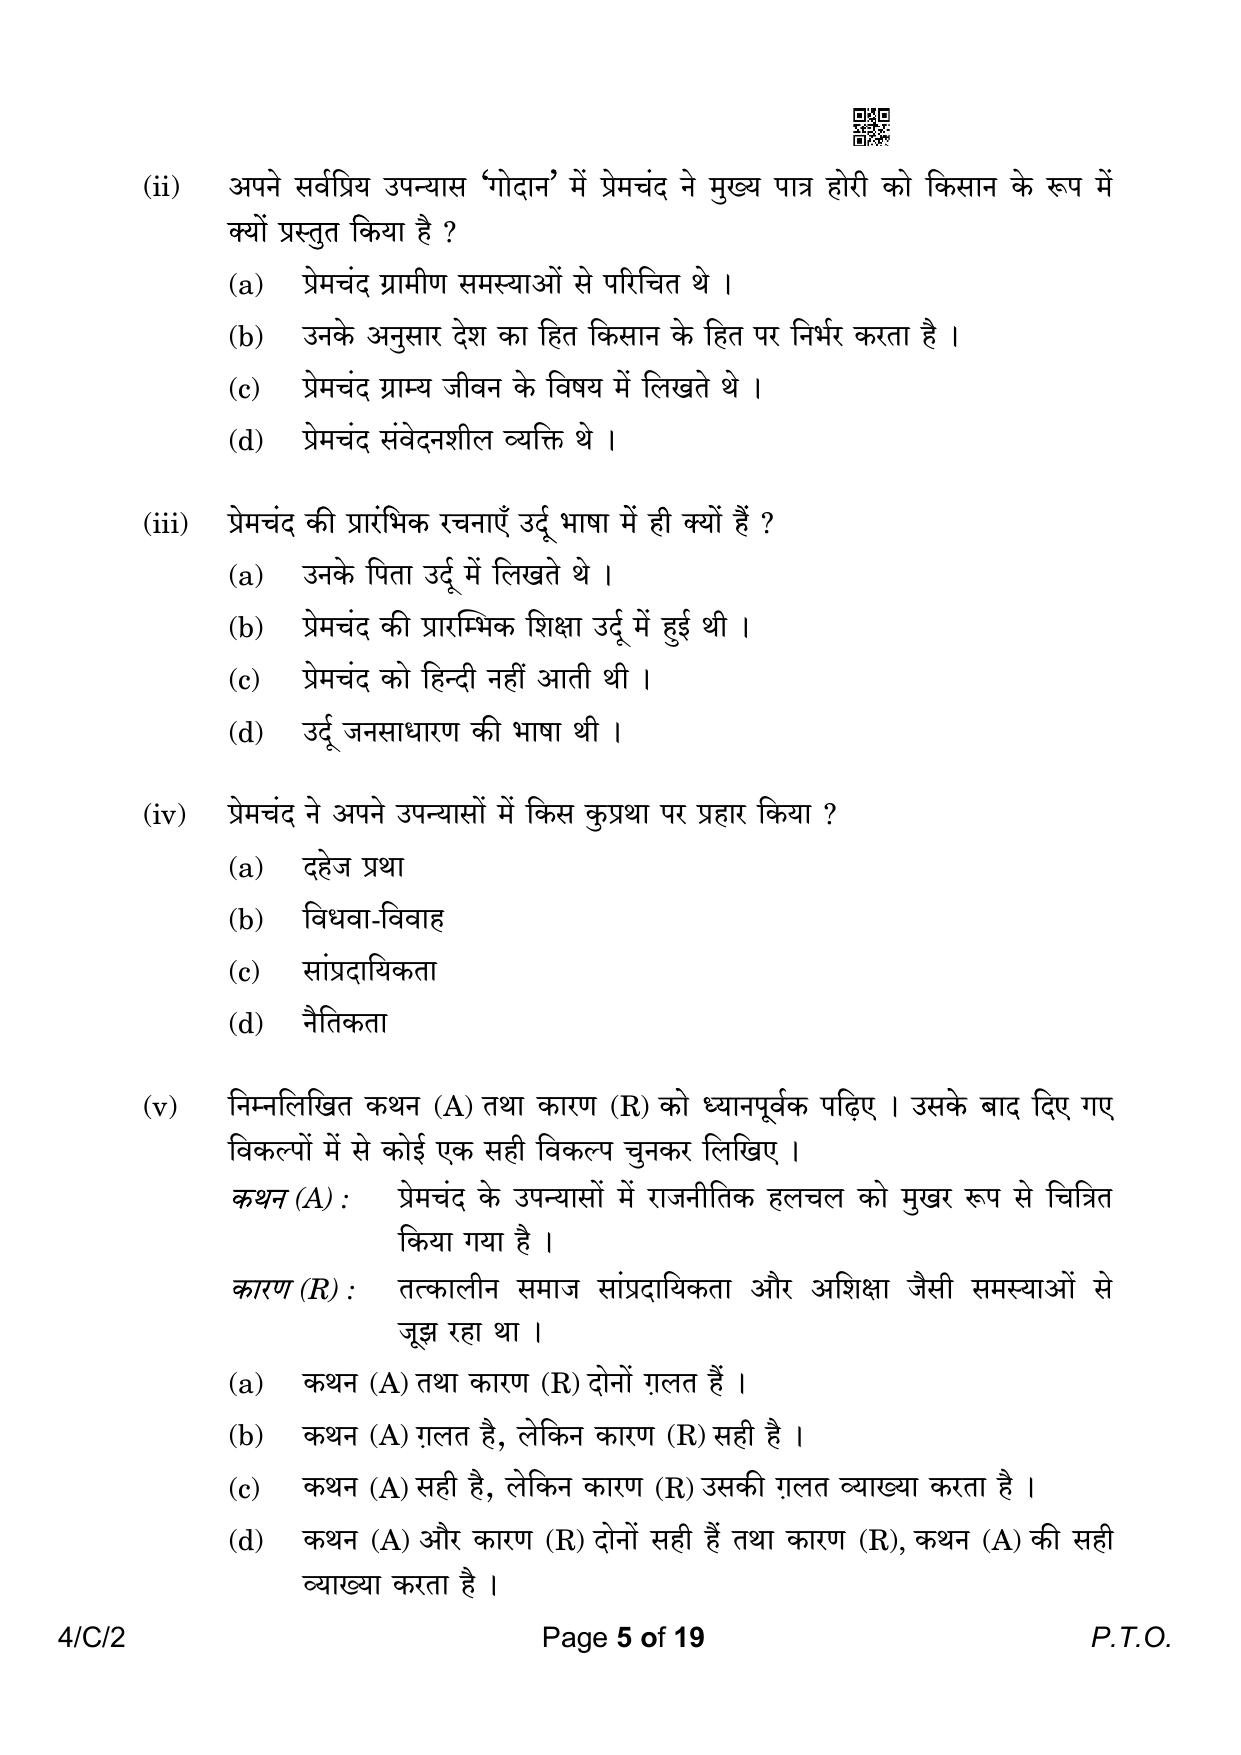 CBSE Class 10 4-2 Hindi B 2023 (Compartment) Question Paper - Page 5